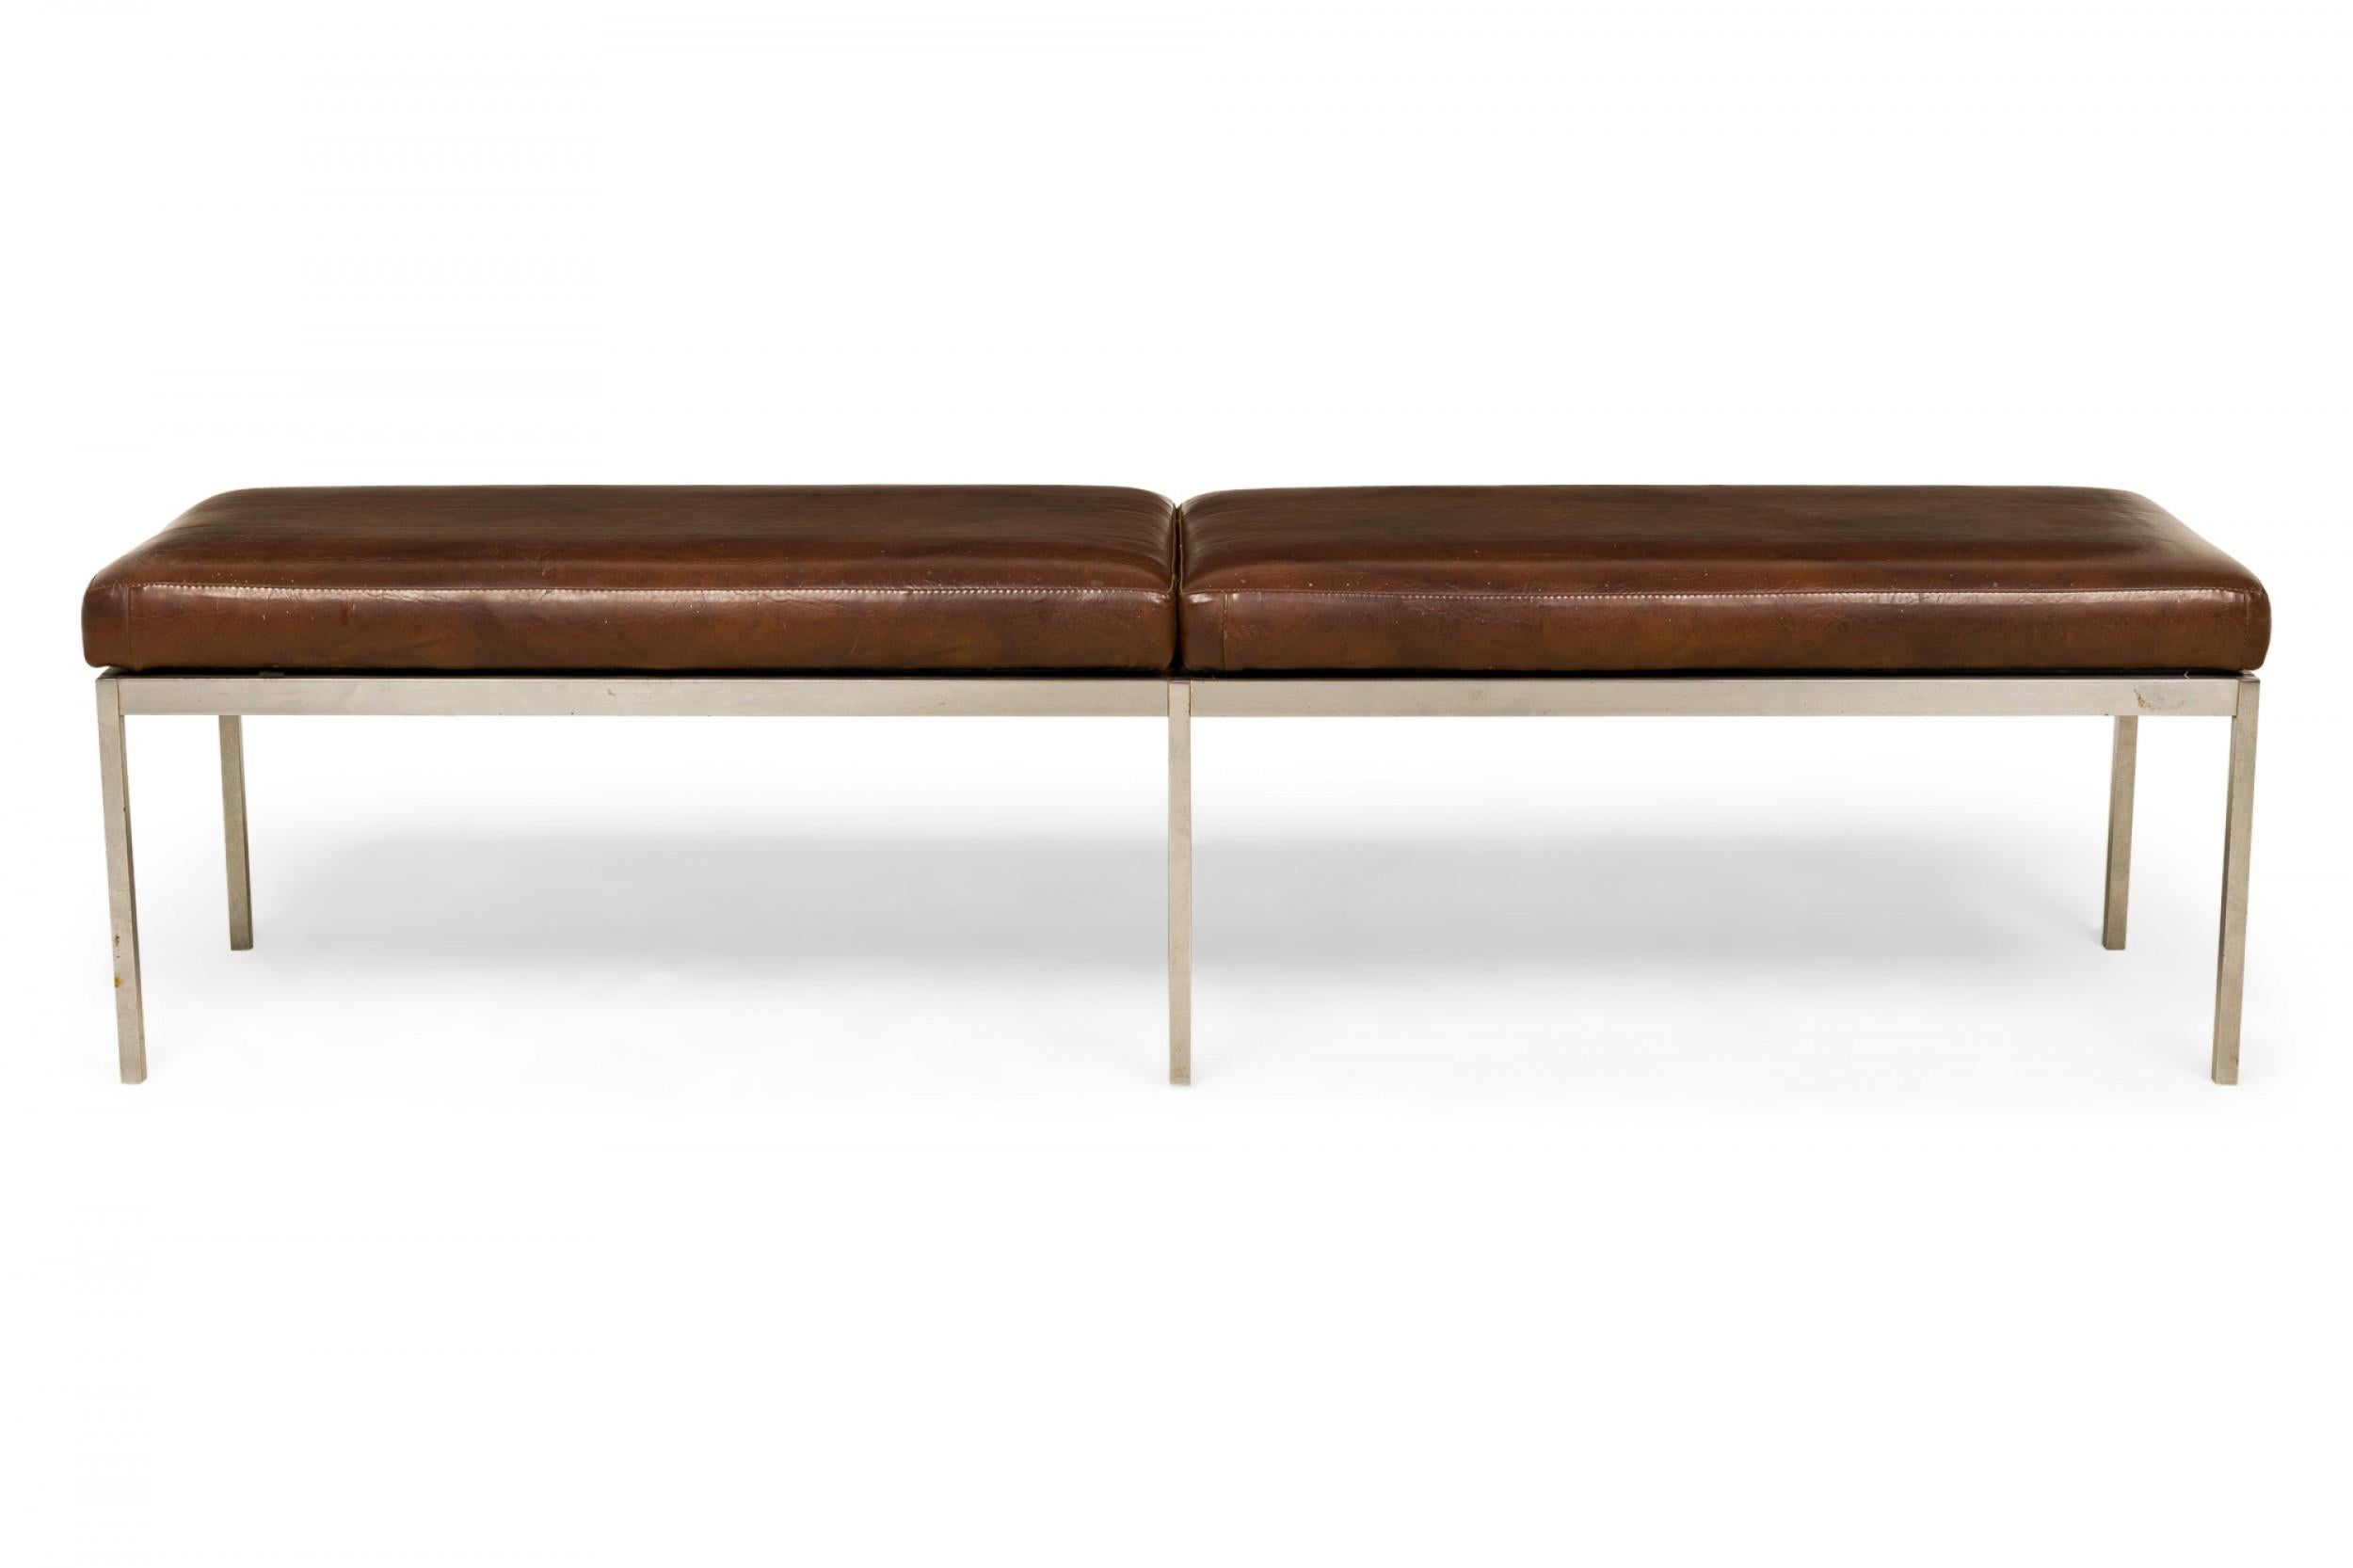 American Mid-Century rectangular bench with a two section chocolate brown leather upholstered seat resting on a square chrome tube frame. (HARRY BERTOIA FOR KNOLL ASSOCIATES).
 